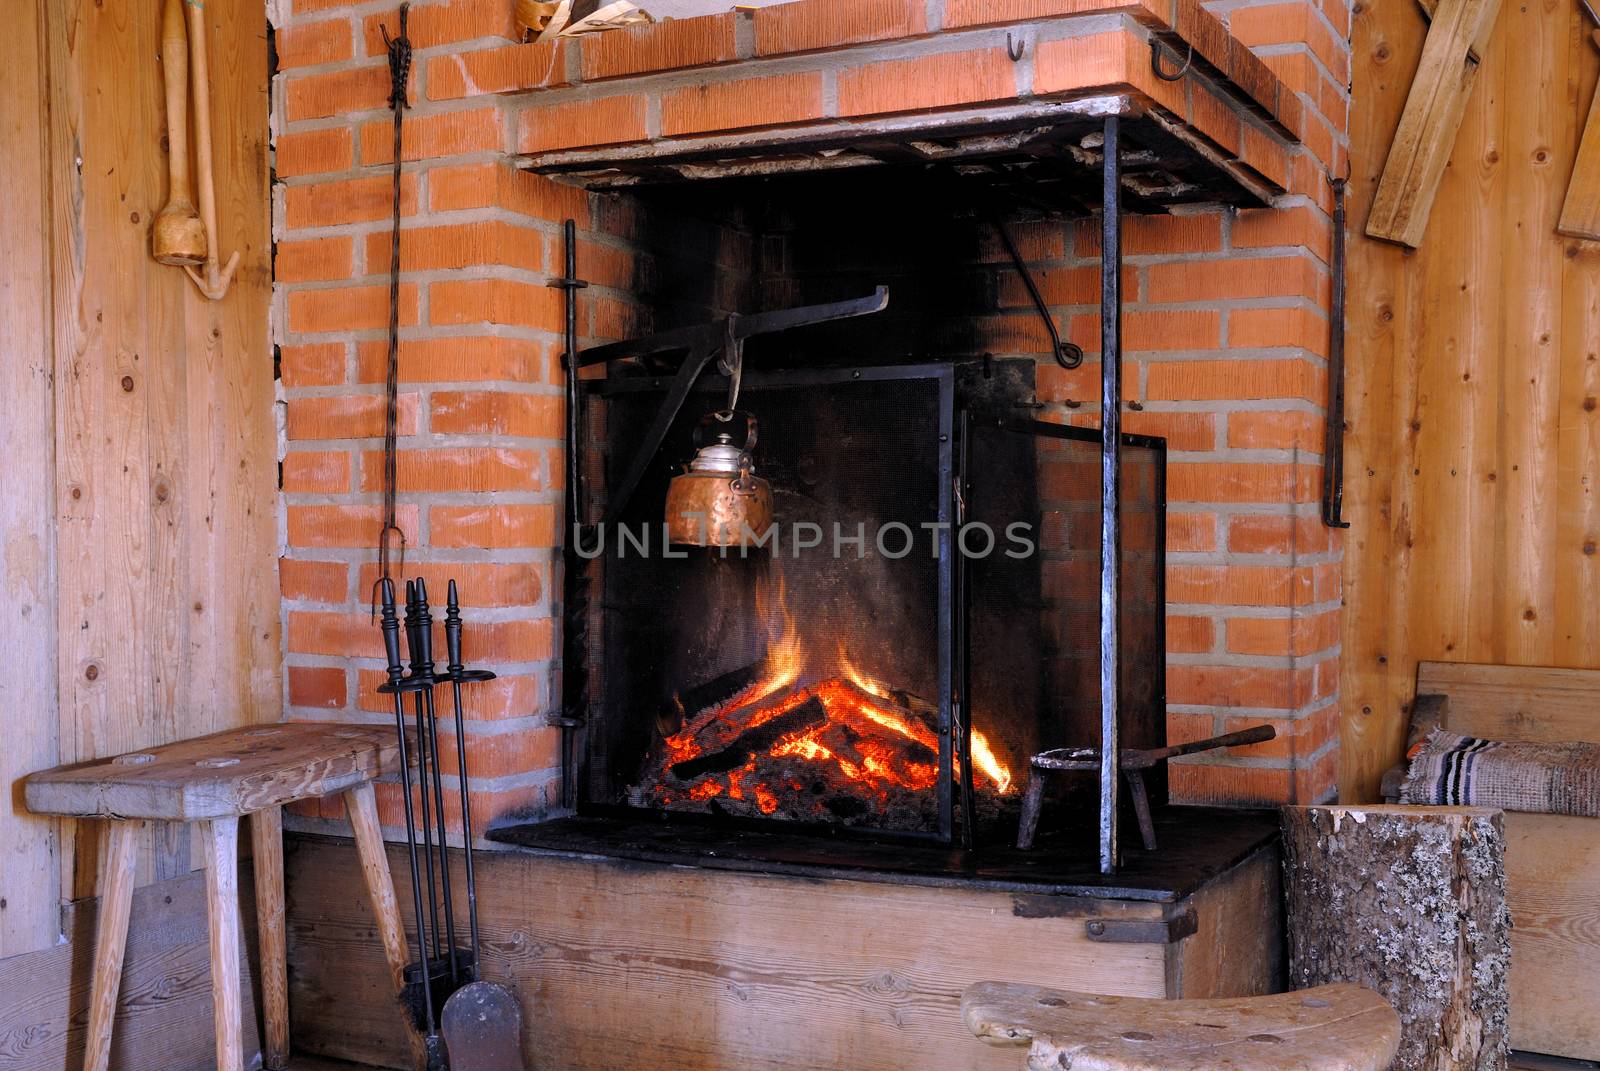 Wood fire in an old style wooden log cabin. A small house in Dalarna, Sweden.